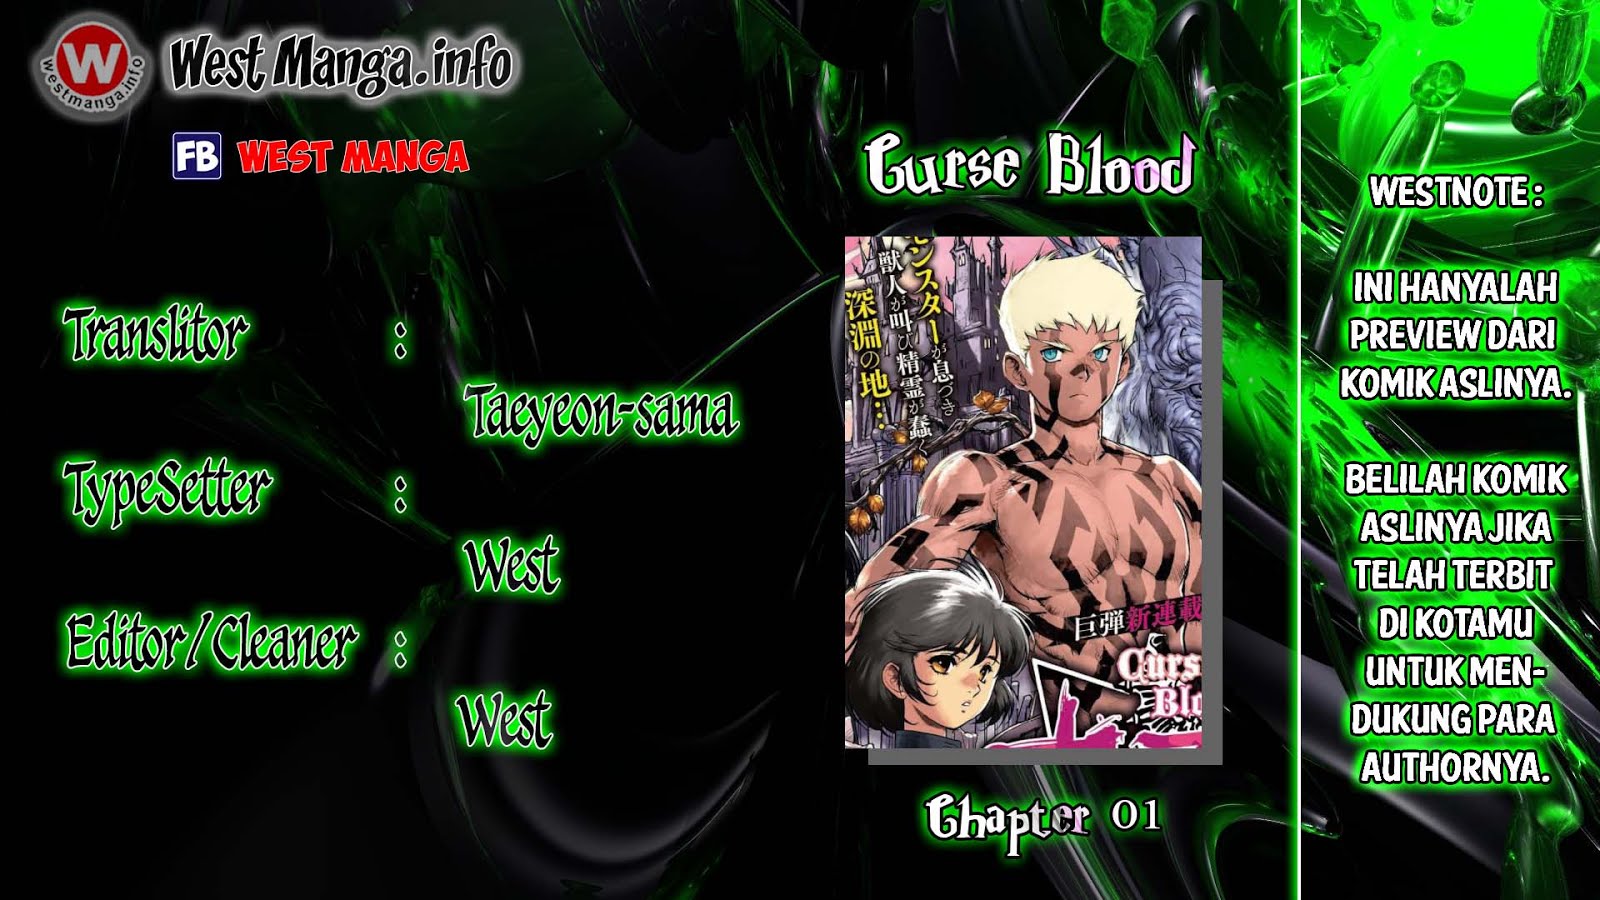 Curse Blood Chapter 01